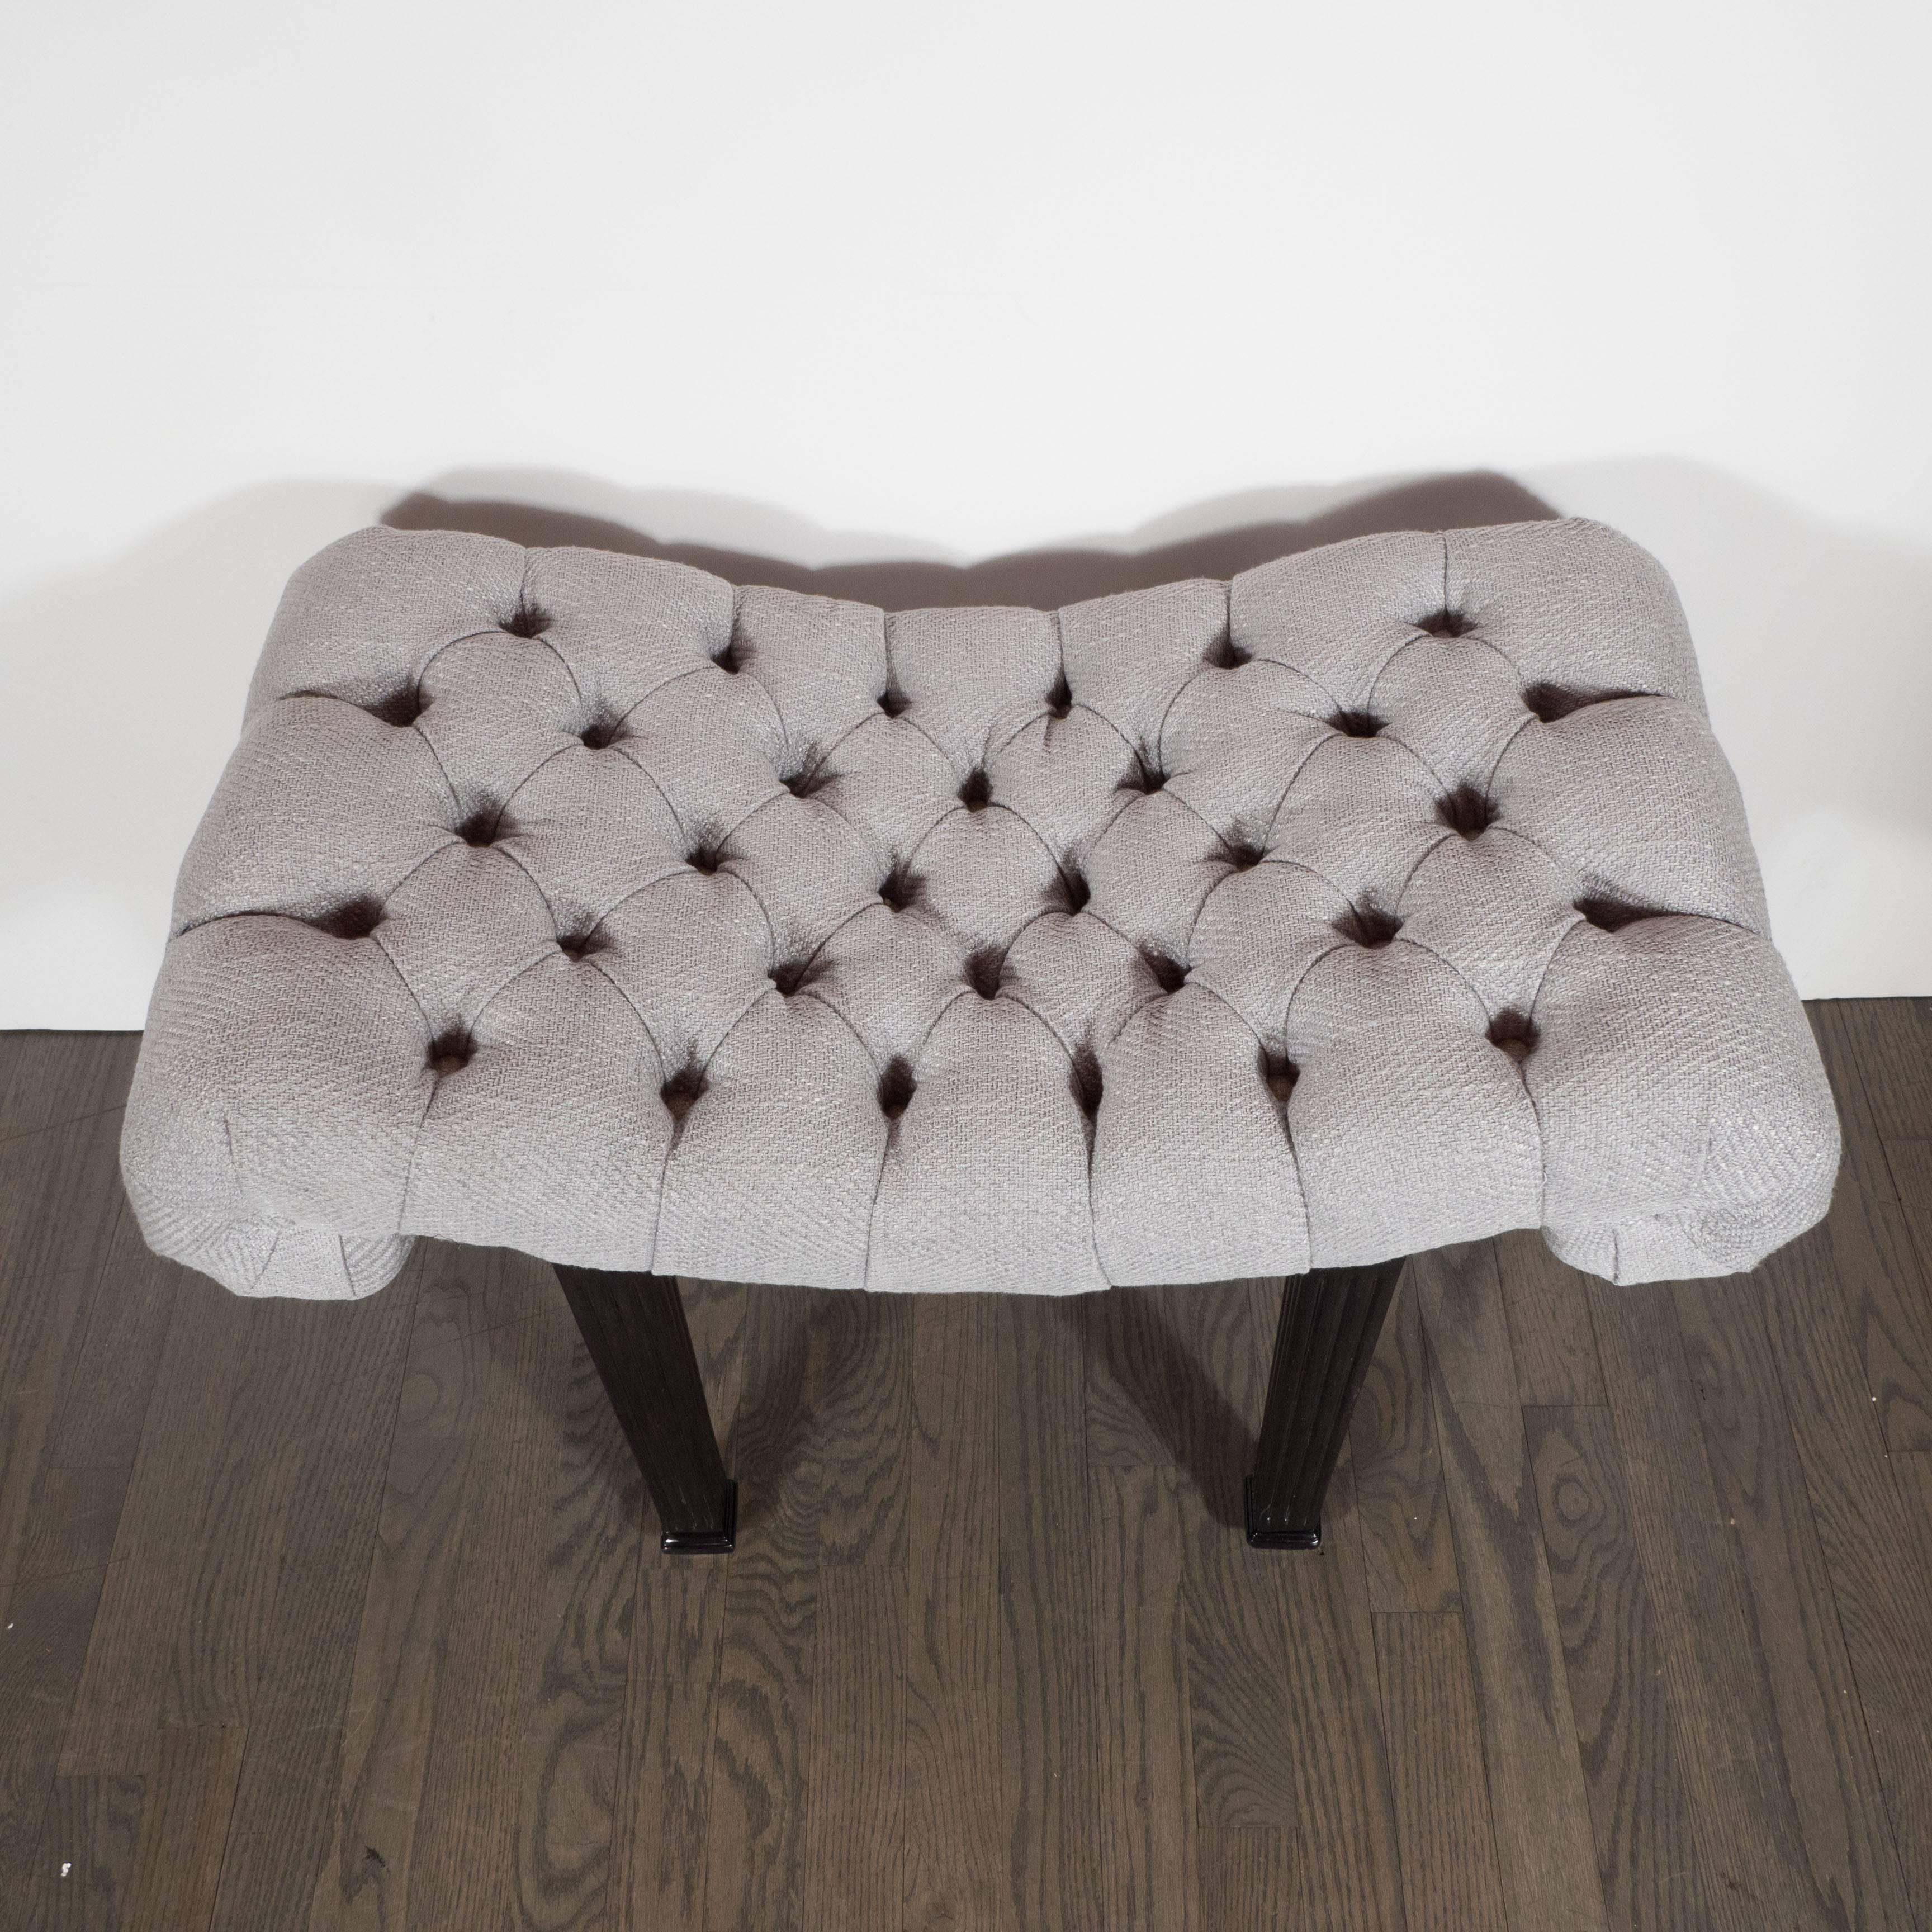 1940s Hollywood Regency scroll design button tufted bench by Grosfeld House in ebonized walnut and silver-blue textured fabric, attractively decorated with button tufts creating a sumptuous soft, curvy and sensual quality typical of the Hollywood